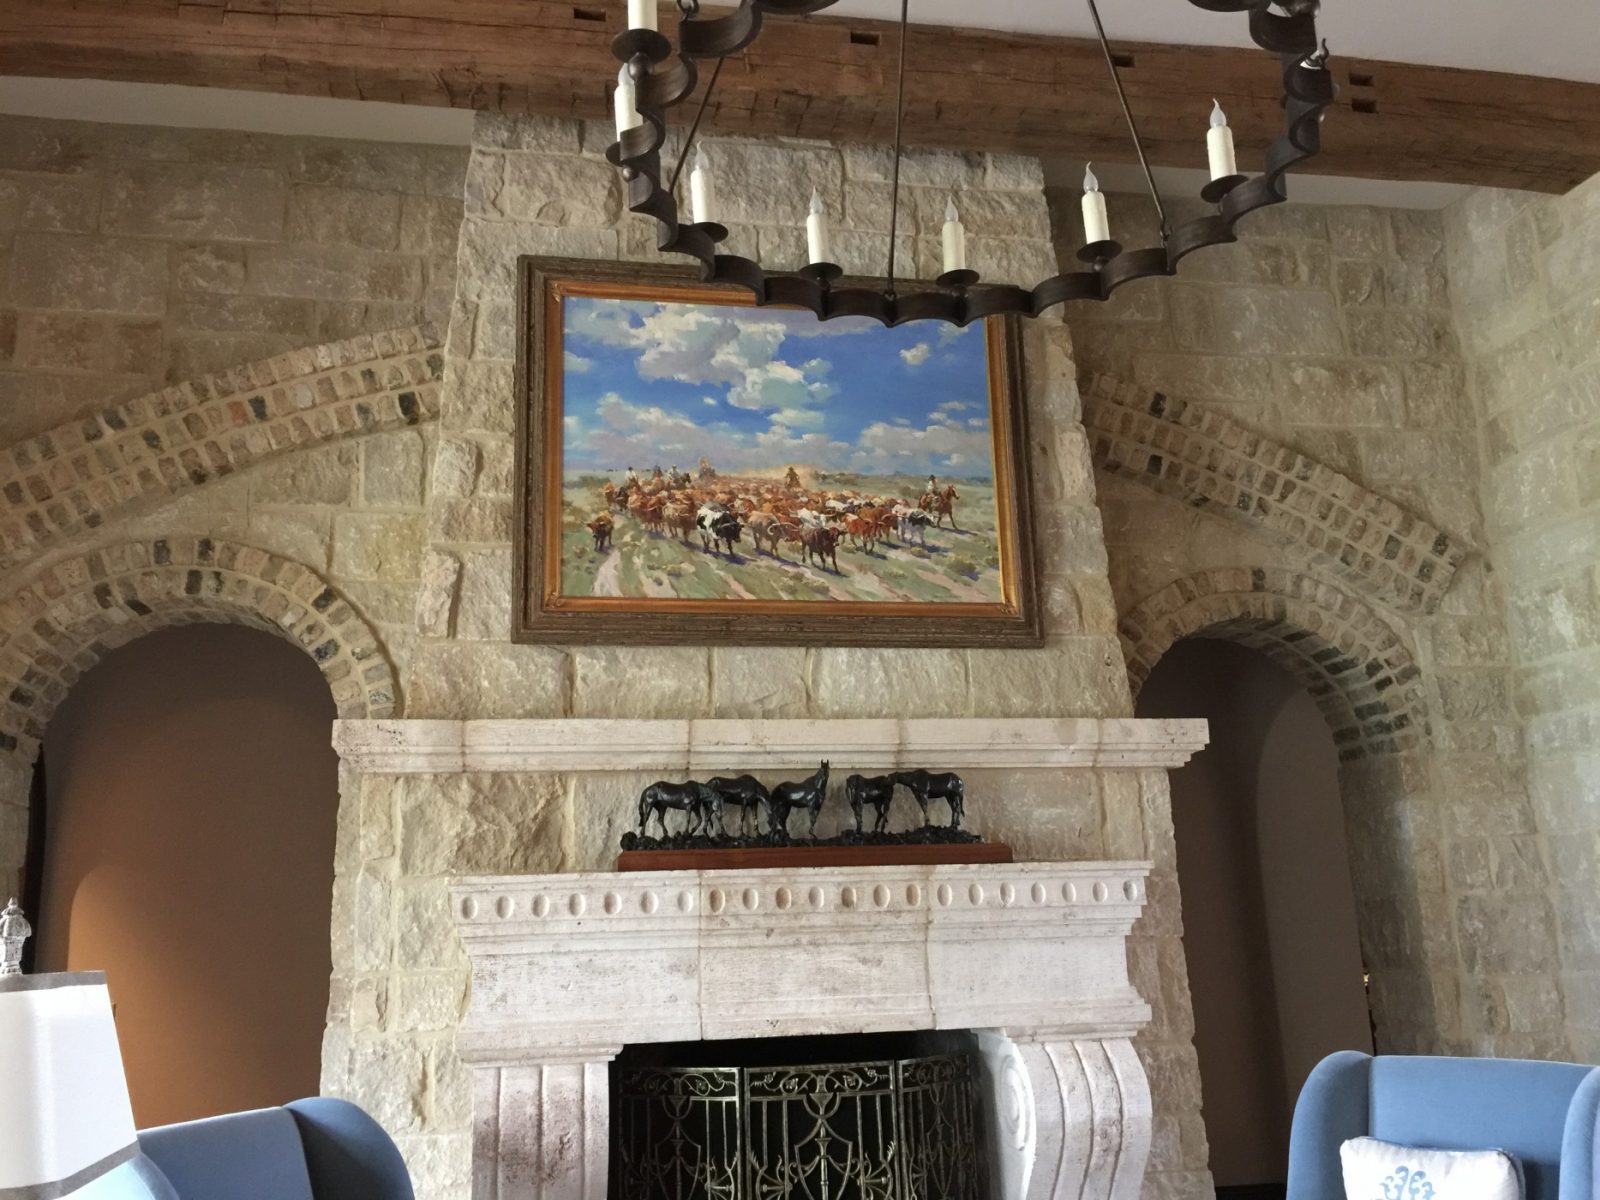 Xiang Zhang painting hanging over mantle